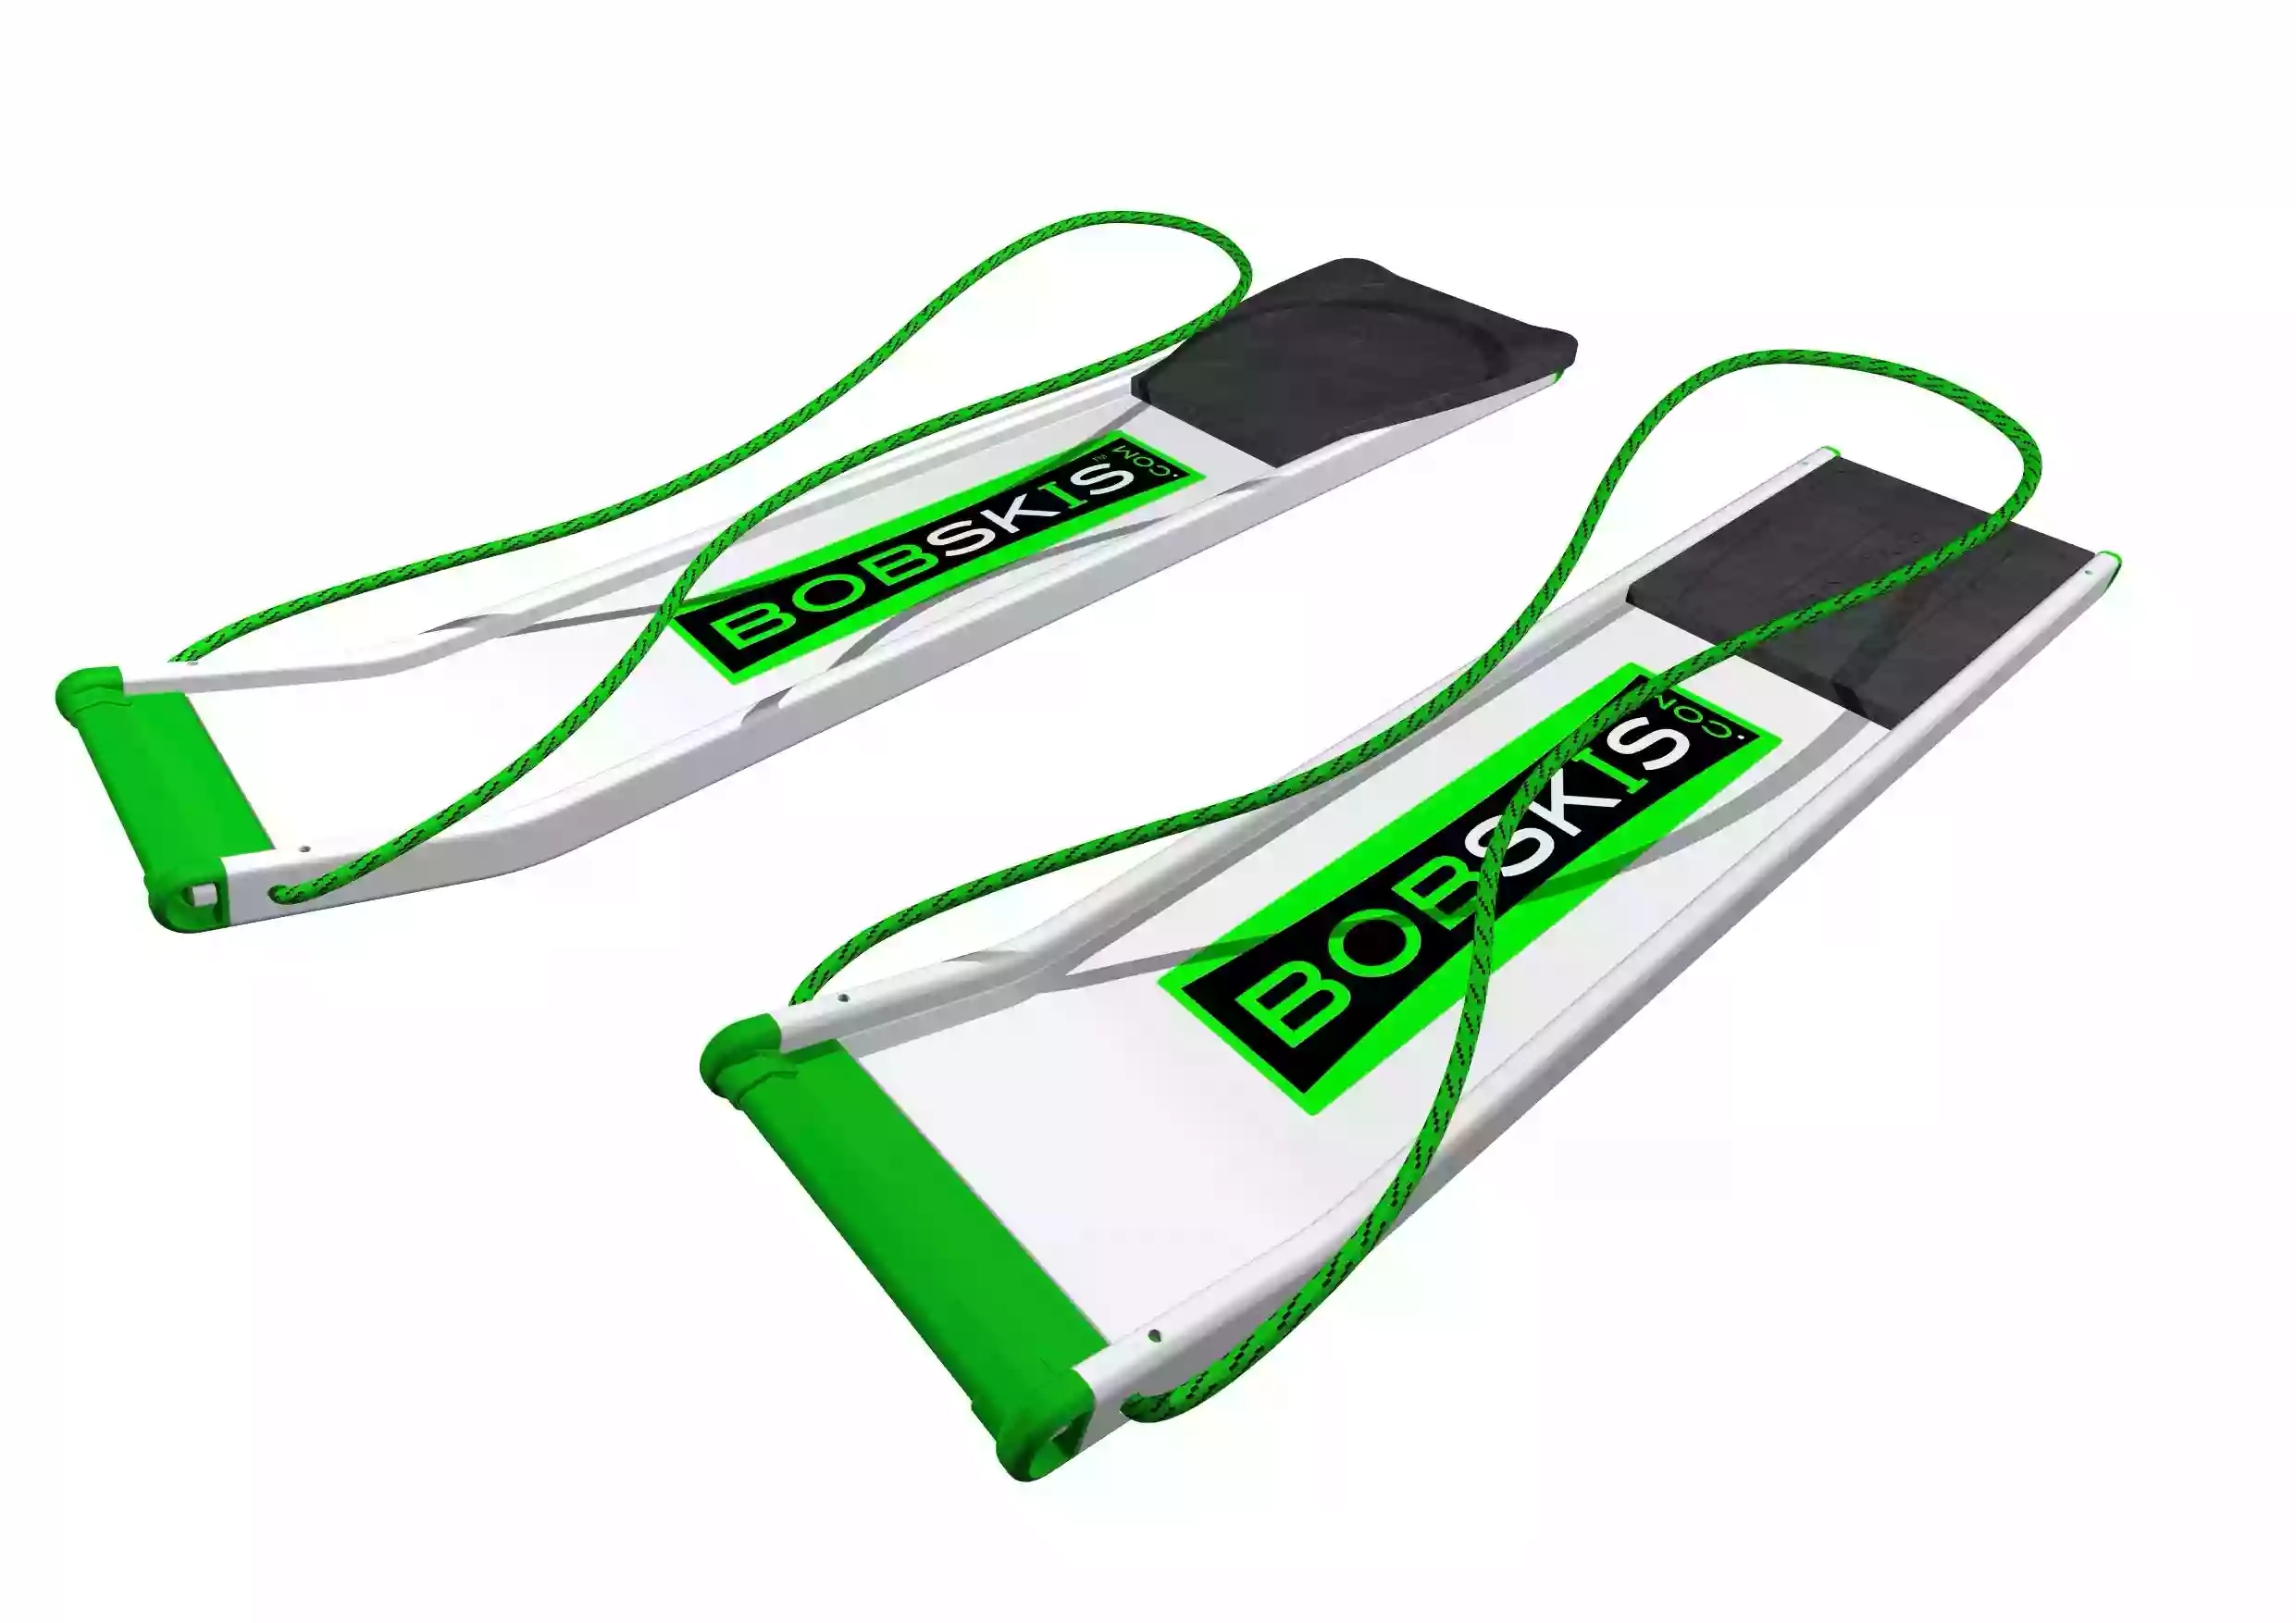 Bobskis Products